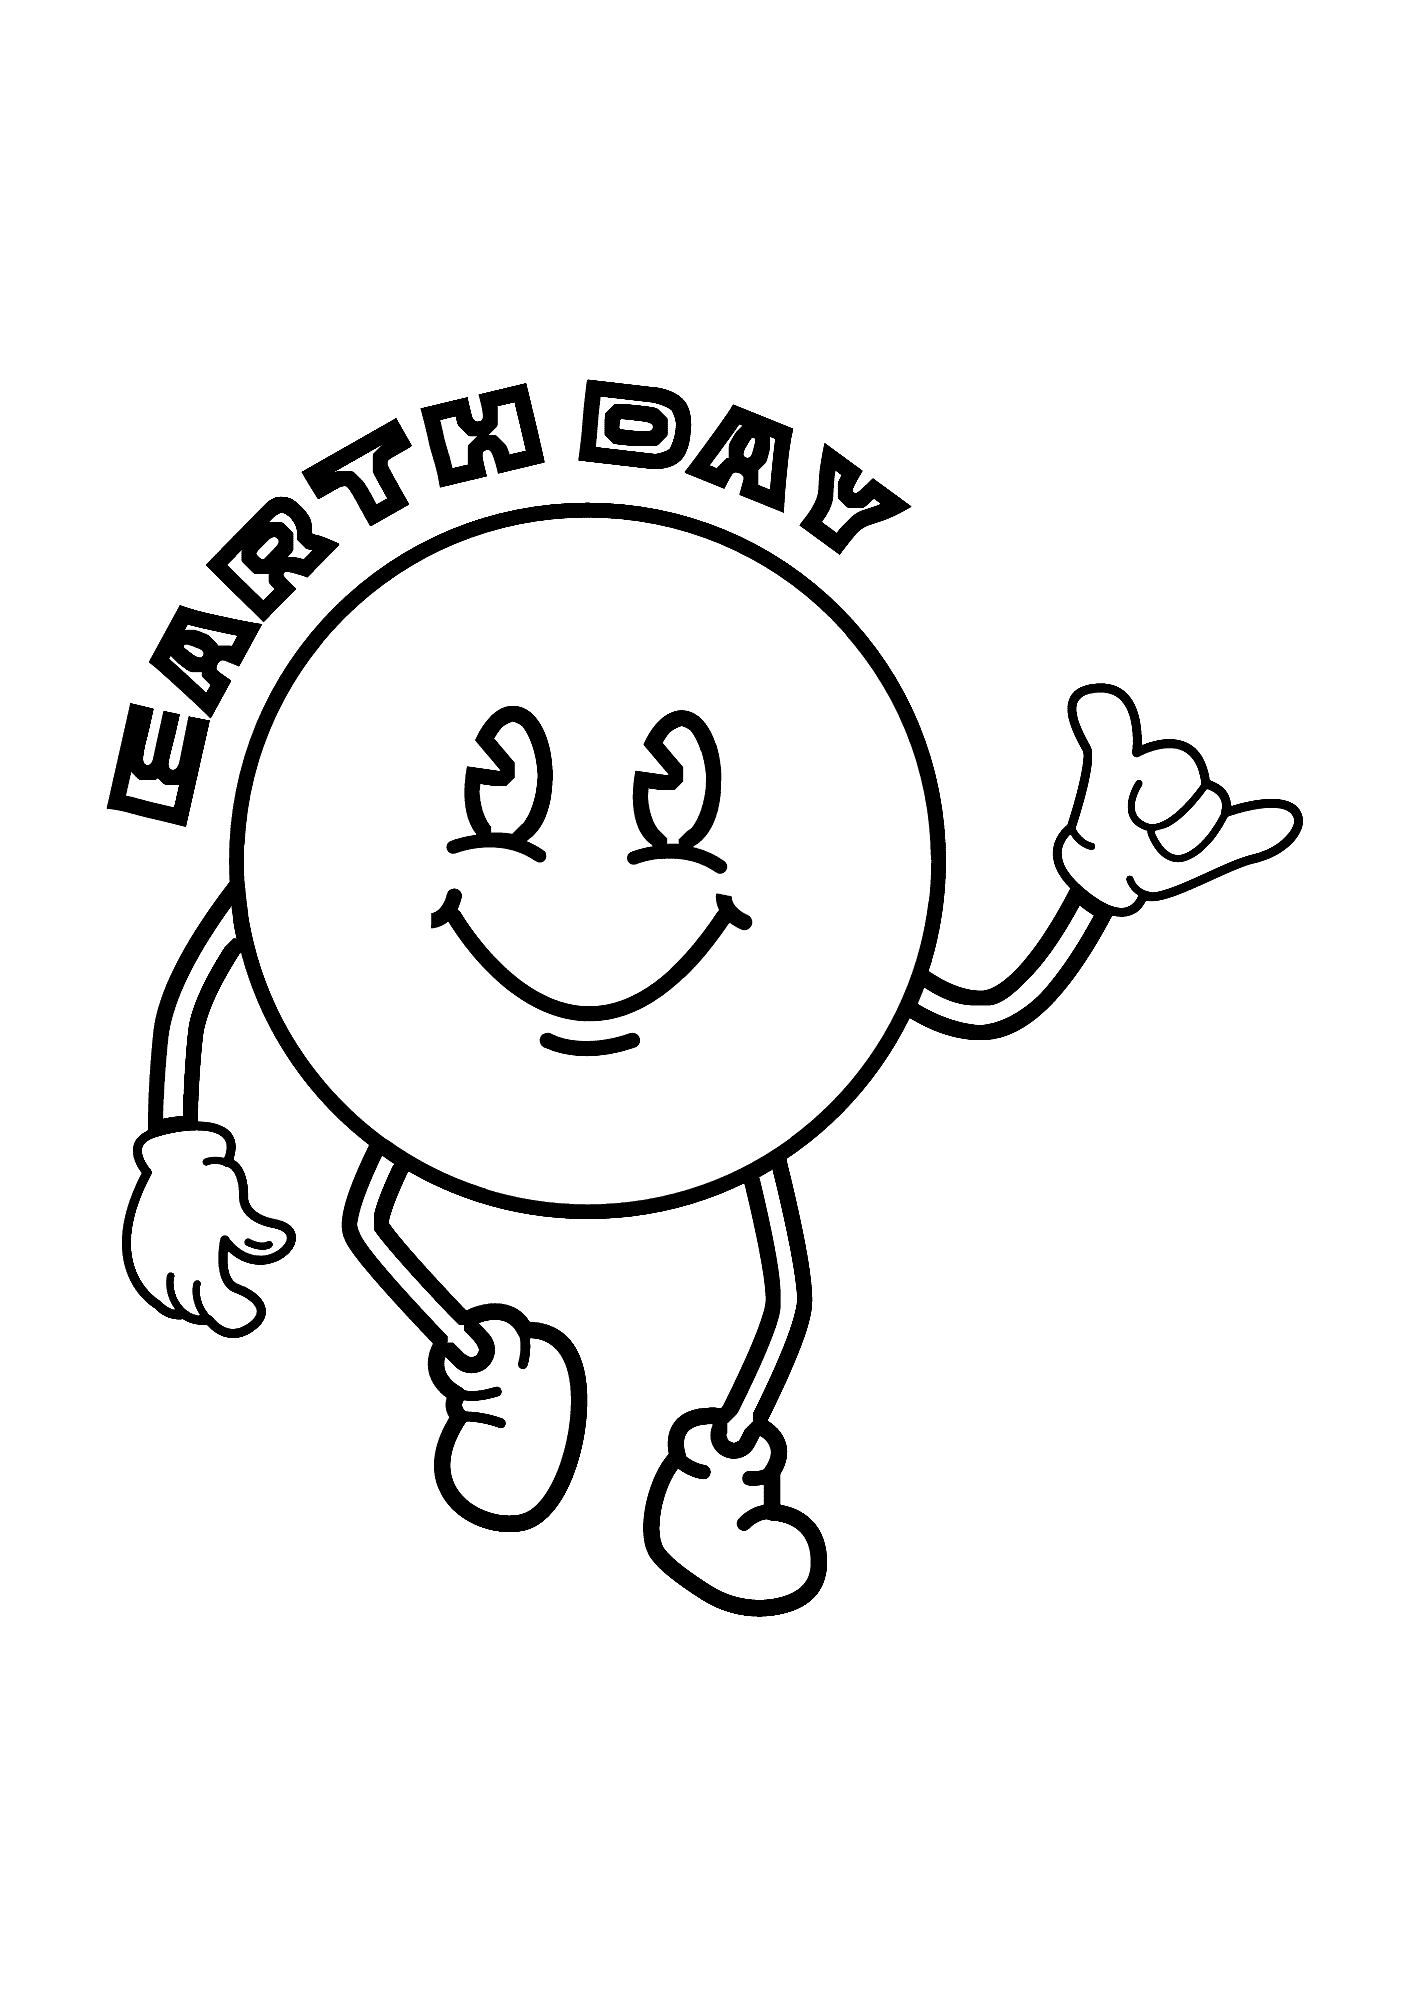 Earth Day Logo For Kids Coloring Page